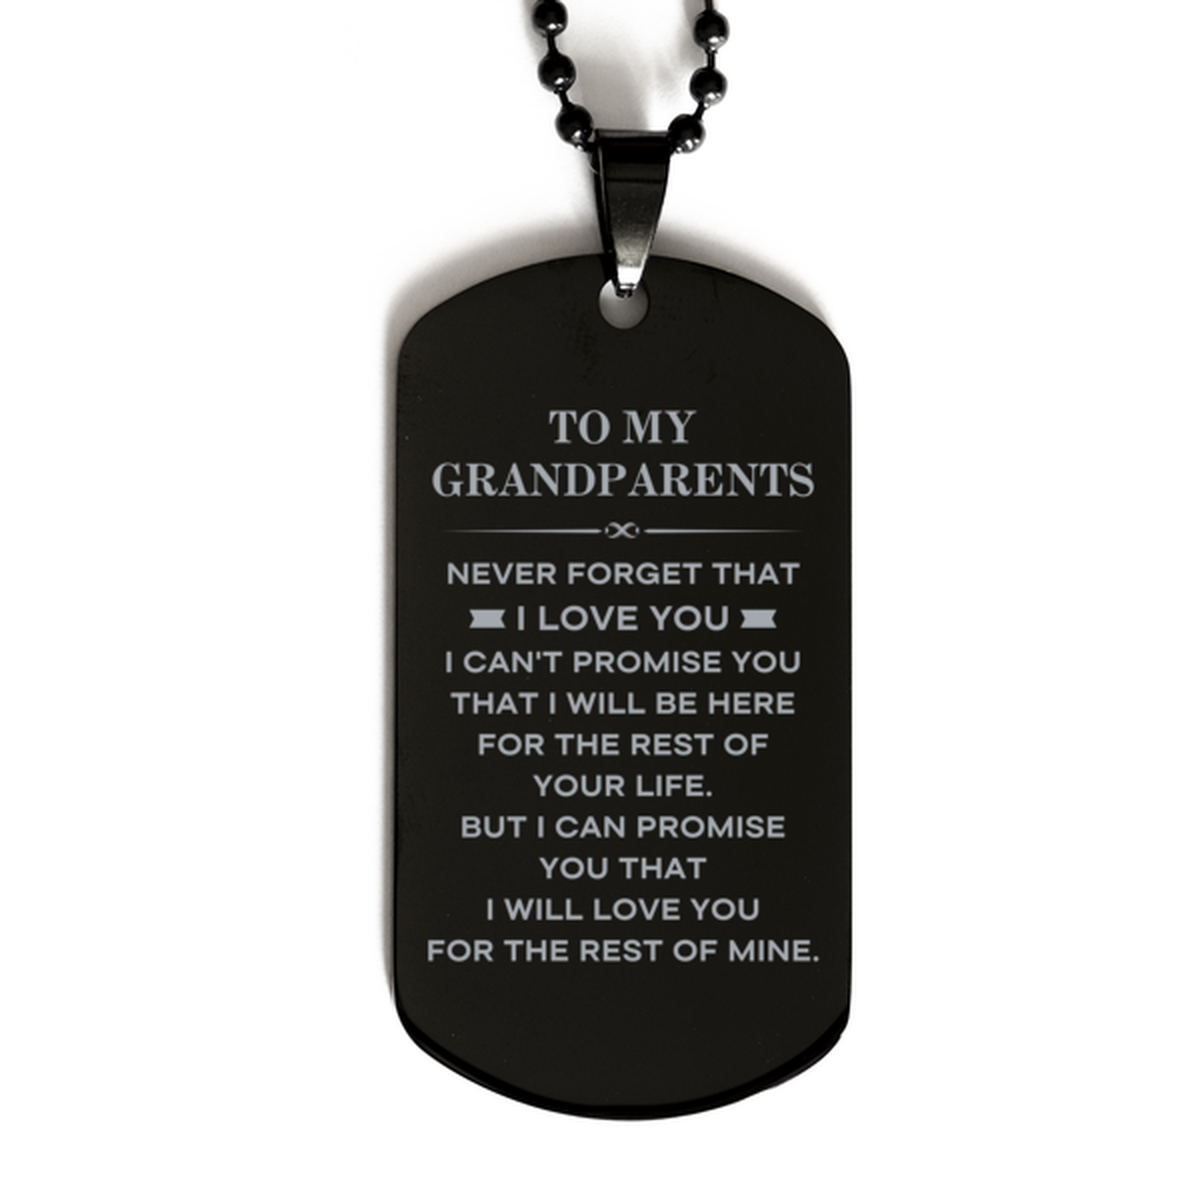 To My Grandparents Gifts, I will love you for the rest of mine, Love Grandparents Dog Tag Necklace, Birthday Christmas Unique Black Dog Tag For Grandparents